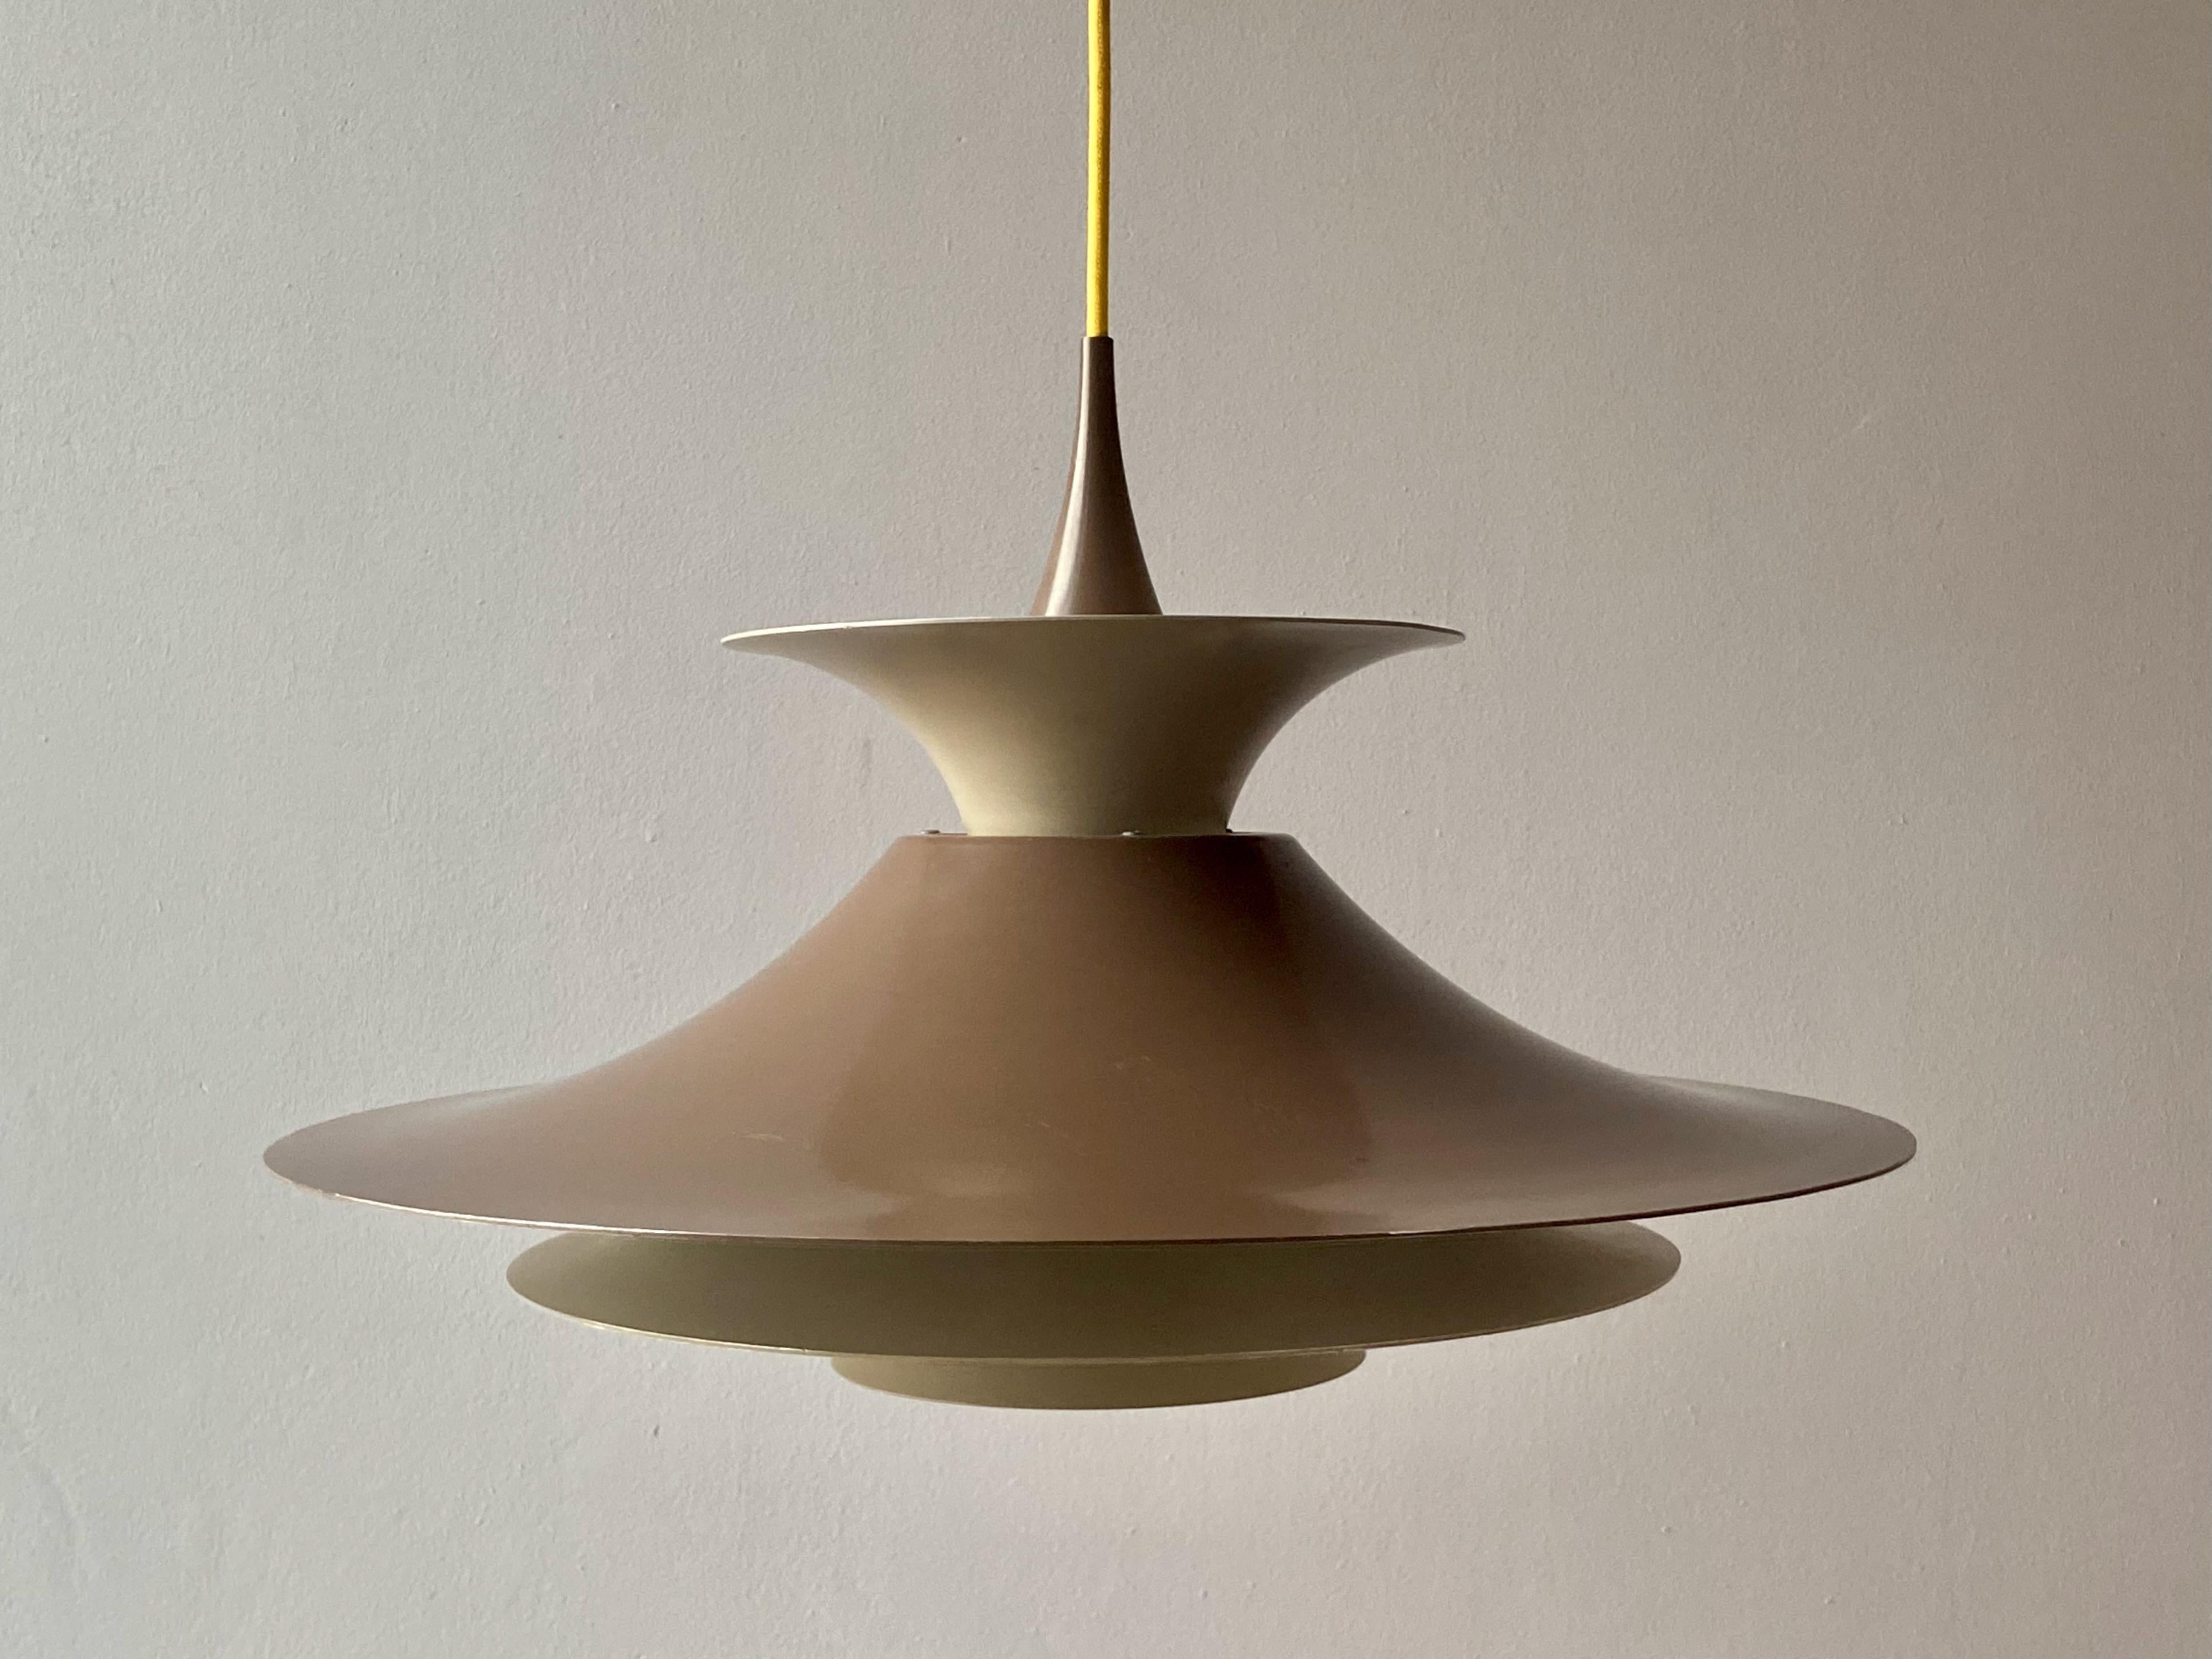 Radius 1 pendant by Erik Balslev. Brown and beige shades inside white lacquered aluminium. Produced by Fog & Mørup. Measures: 47 cm diameter version with E26/27 Edison socket. No parts missing (with reflector) ! With new yellow fabric cord. Ready to